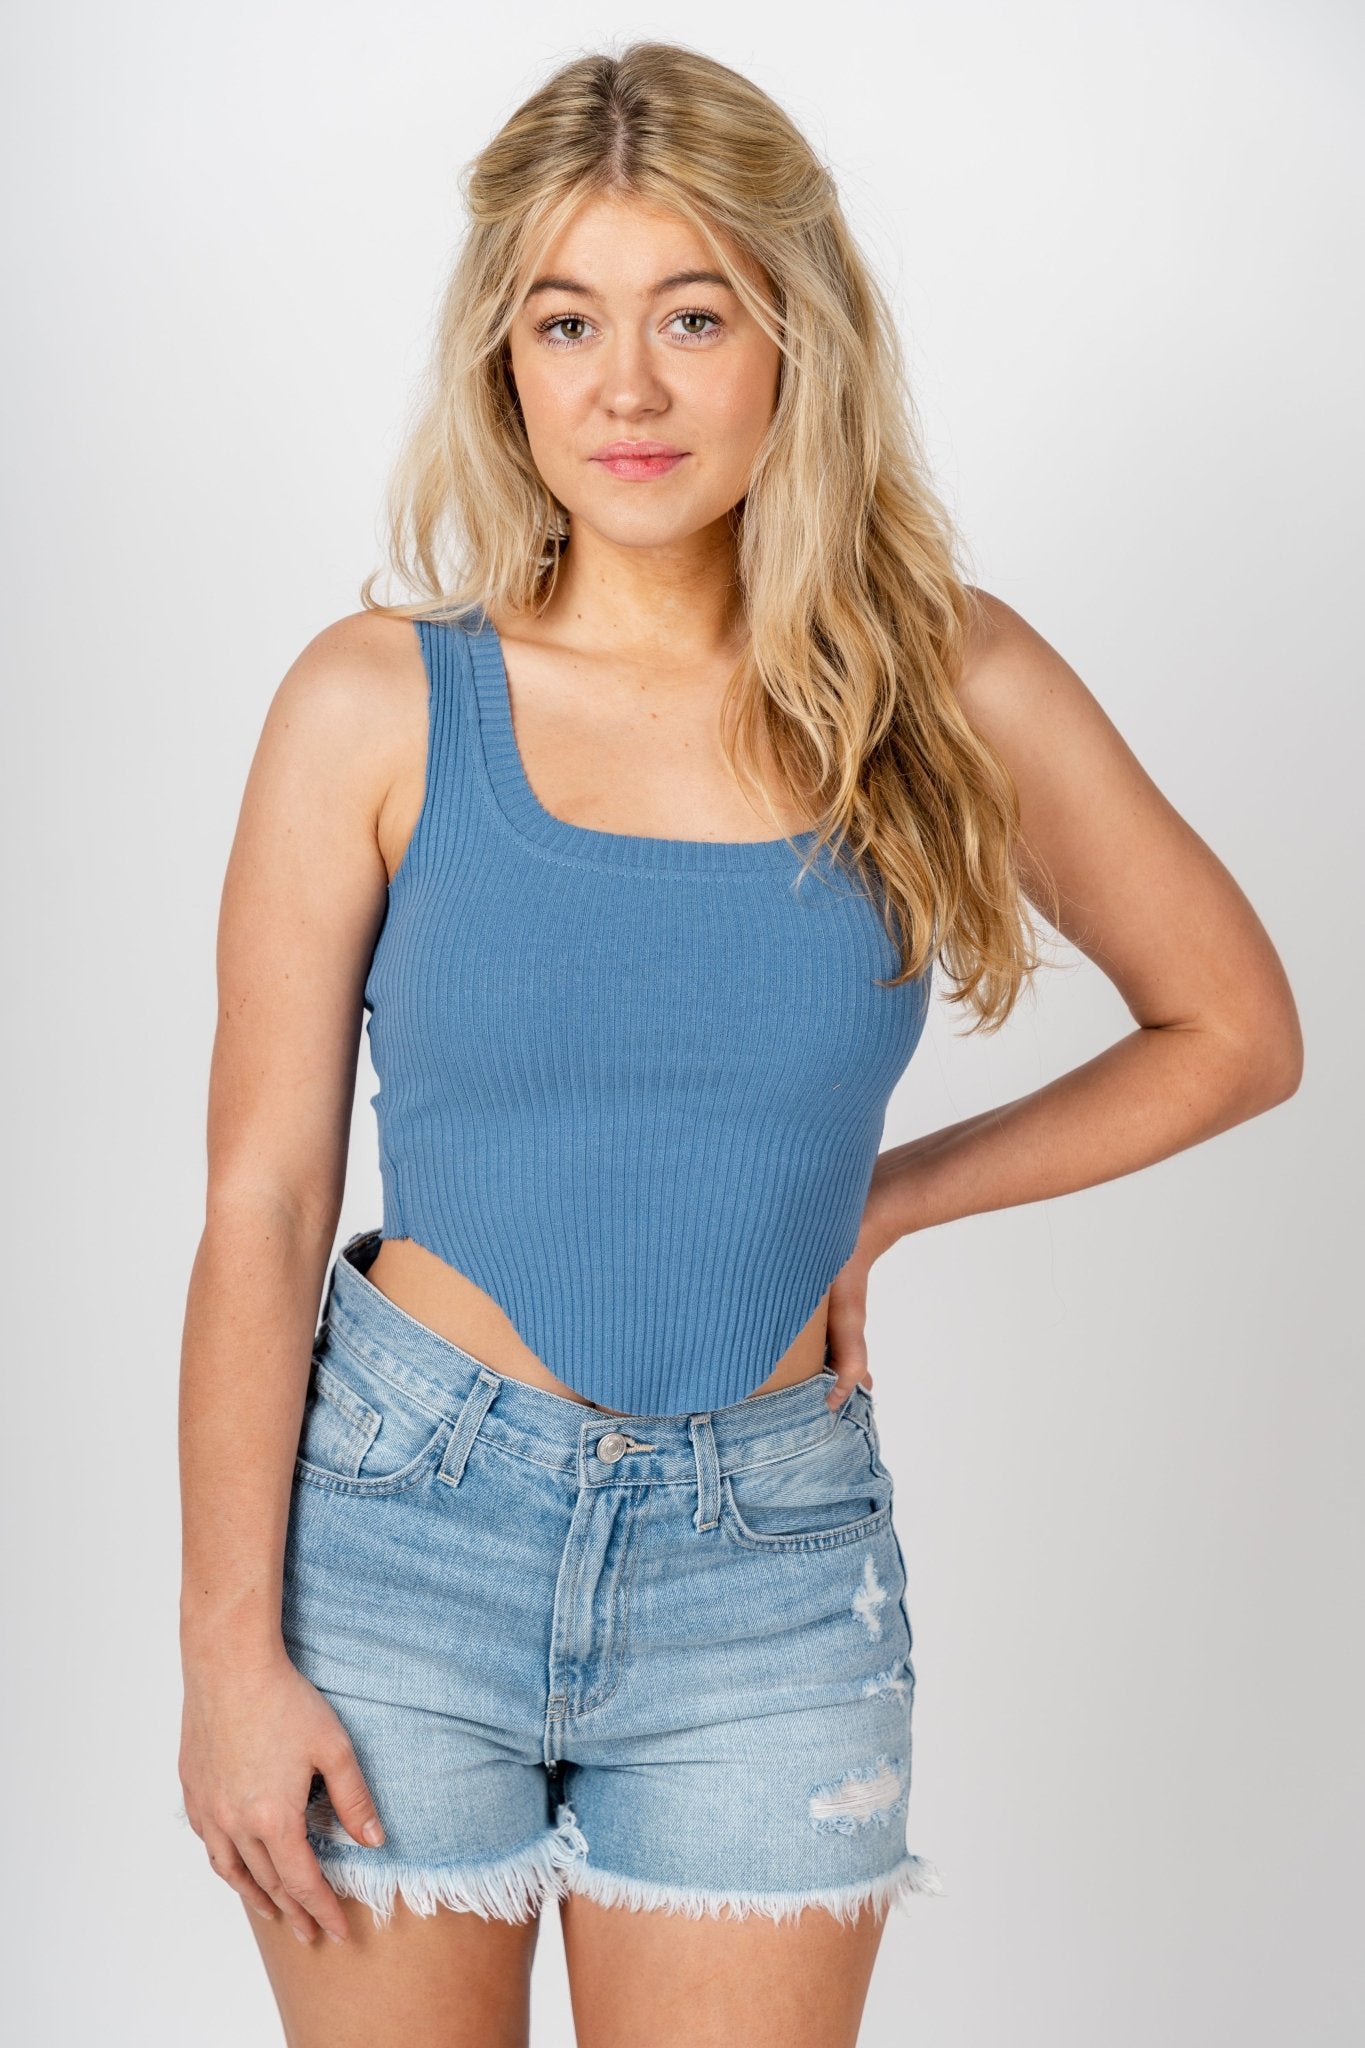 Cora ribbed tank top yale - Affordable Tank Top - Boutique Tank Tops at Lush Fashion Lounge Boutique in Oklahoma City